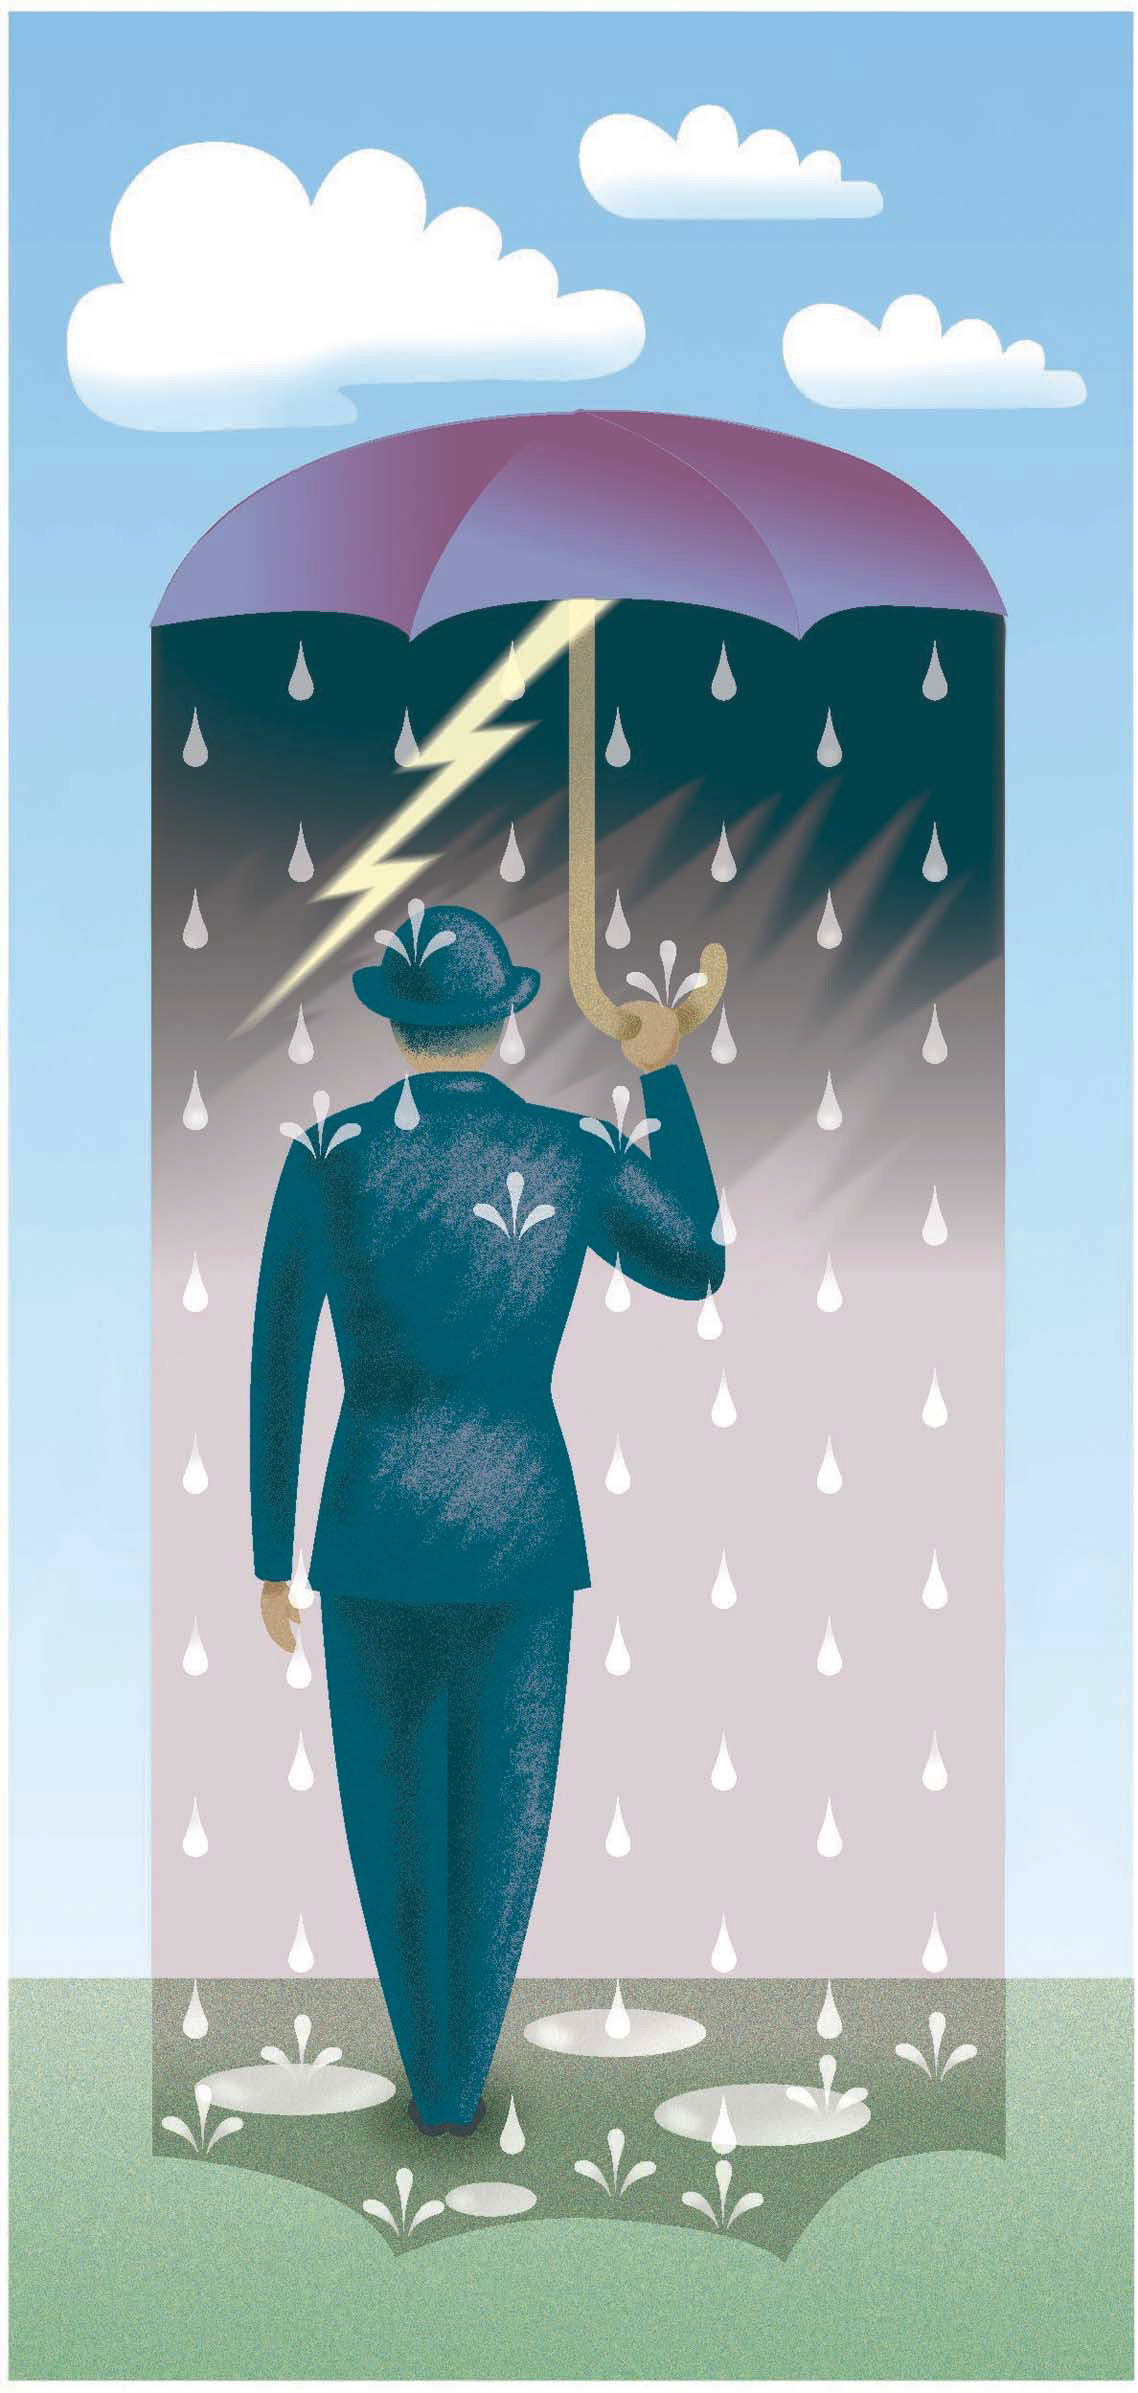 The Fresno Bee files
John Alvin color illustration of person holding umbrella of storms overhead on an otherwise sunny day; for the concept of pessimism or negative thinking.